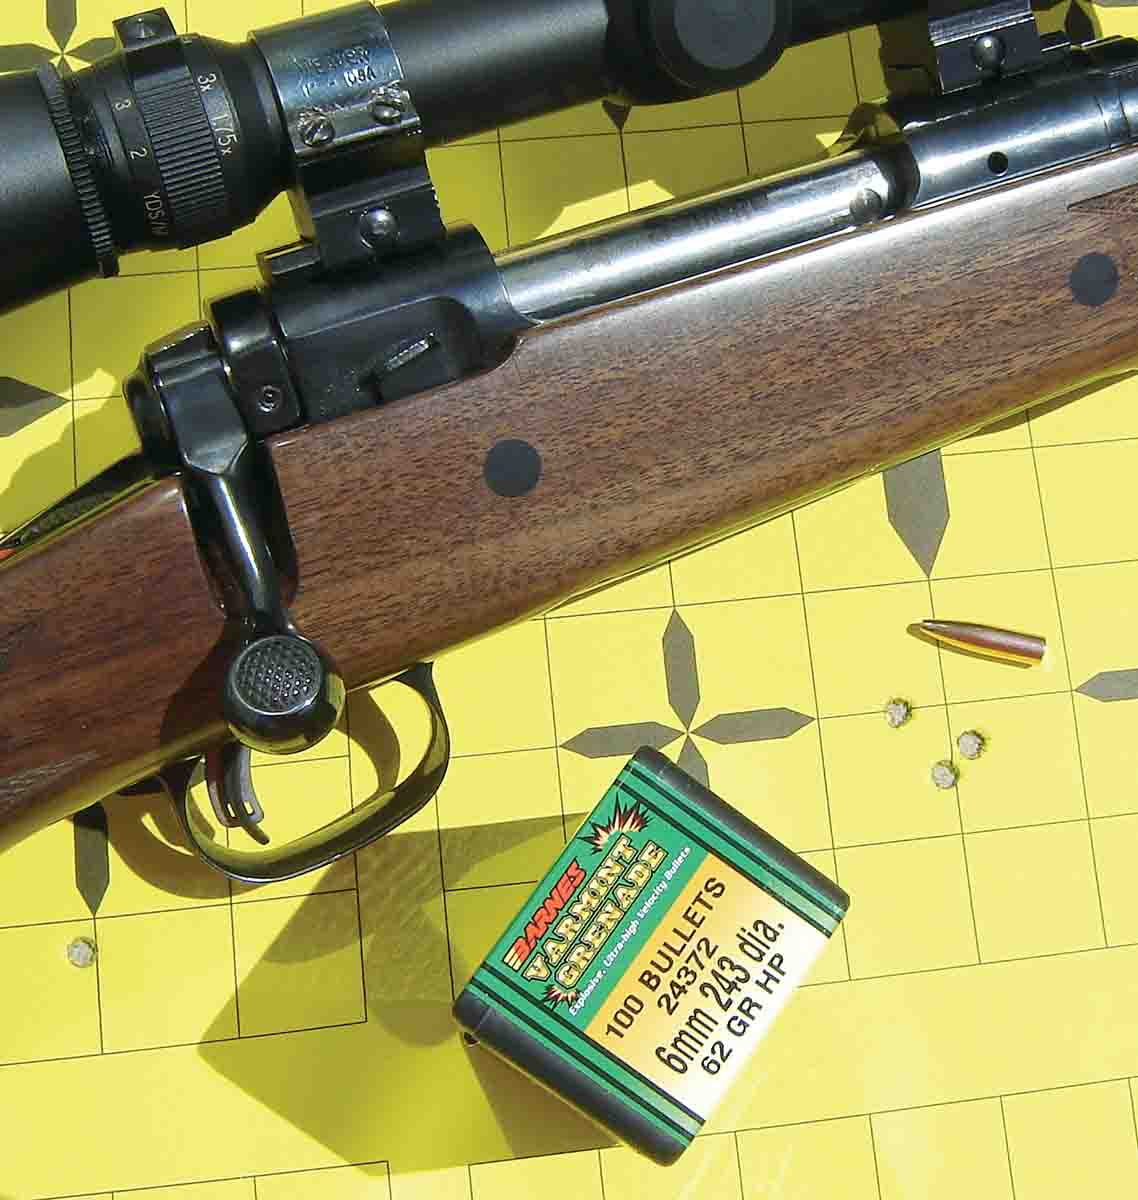 The Savage Classic Model 10 .243 sporter produced .59-inch, 100-yard groups with Varmint Grenade handloads.